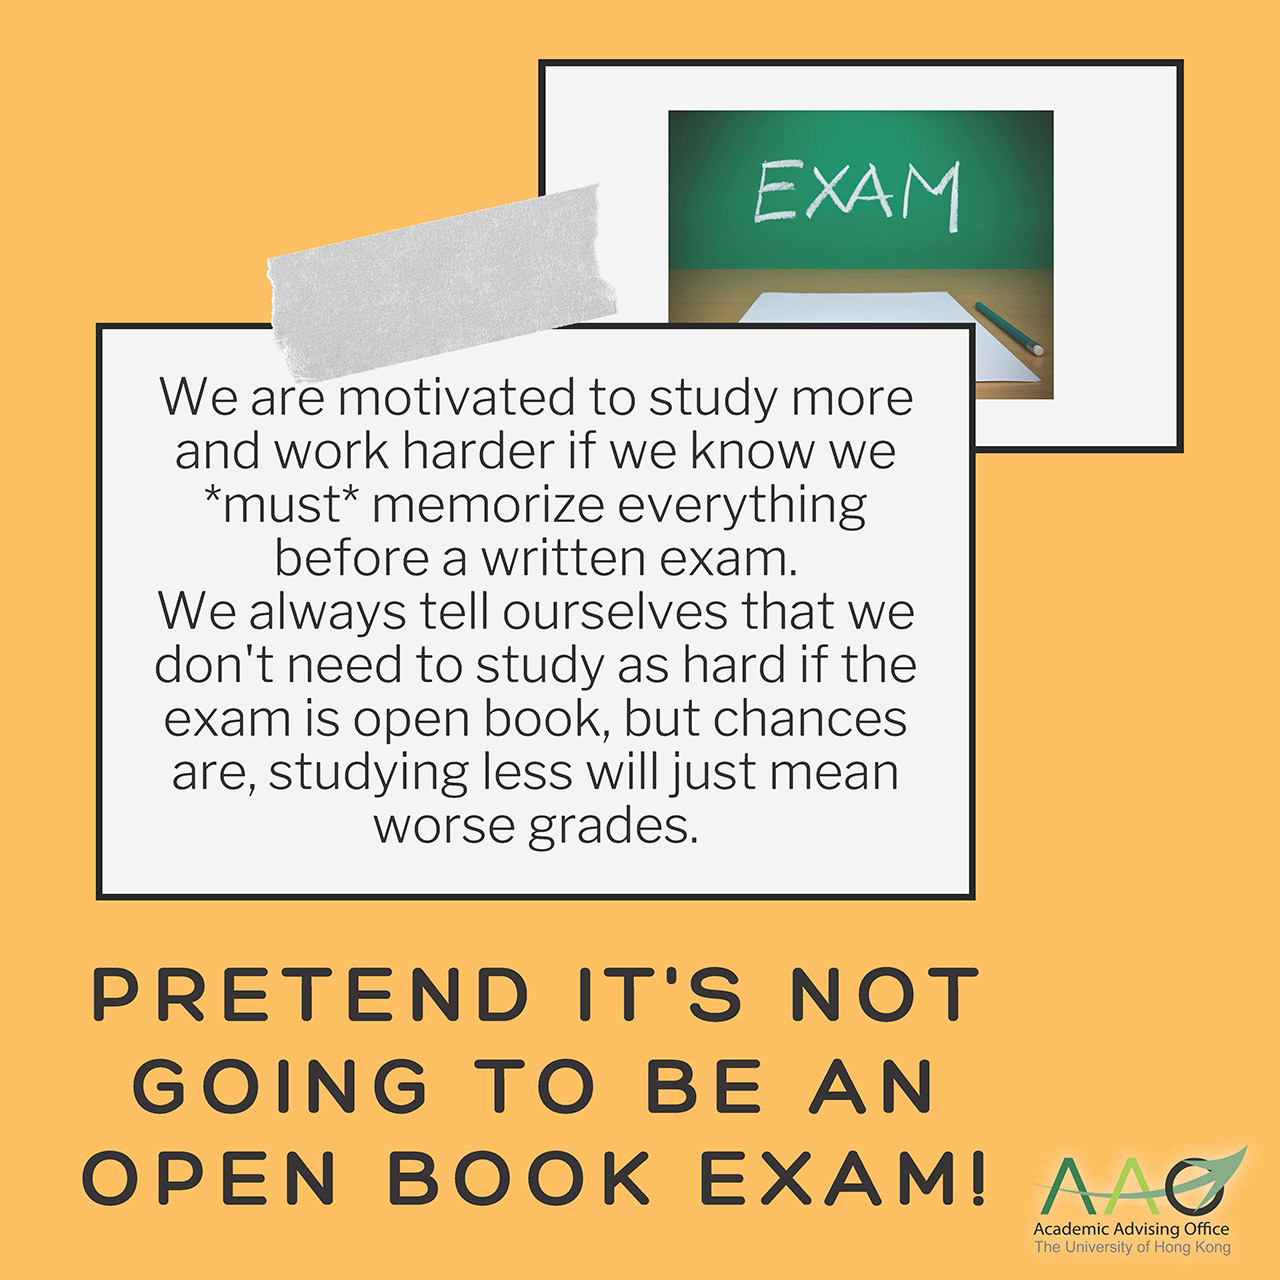 Pretend it's not going to be an open book exam! We are motivated to study more and work harder if we know we *must* memorize everything before a written exam. We always tell ourselves that we don't need to study as hard if the exam is open book, but chances are, studying less will just mean worse grades.